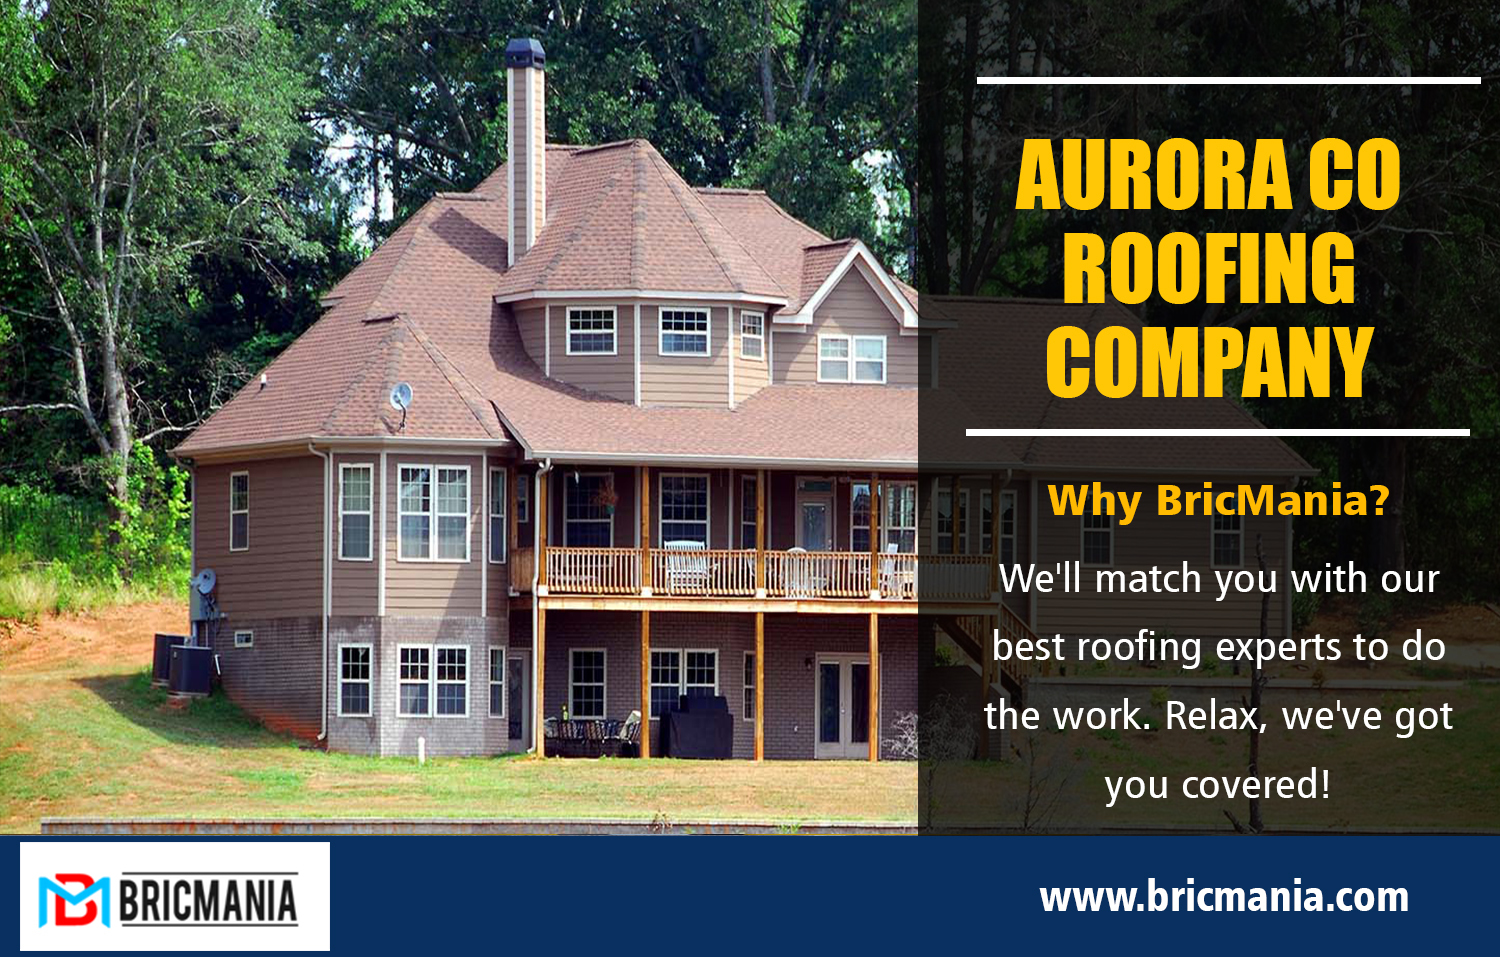  Aurora Co Roofing Company      